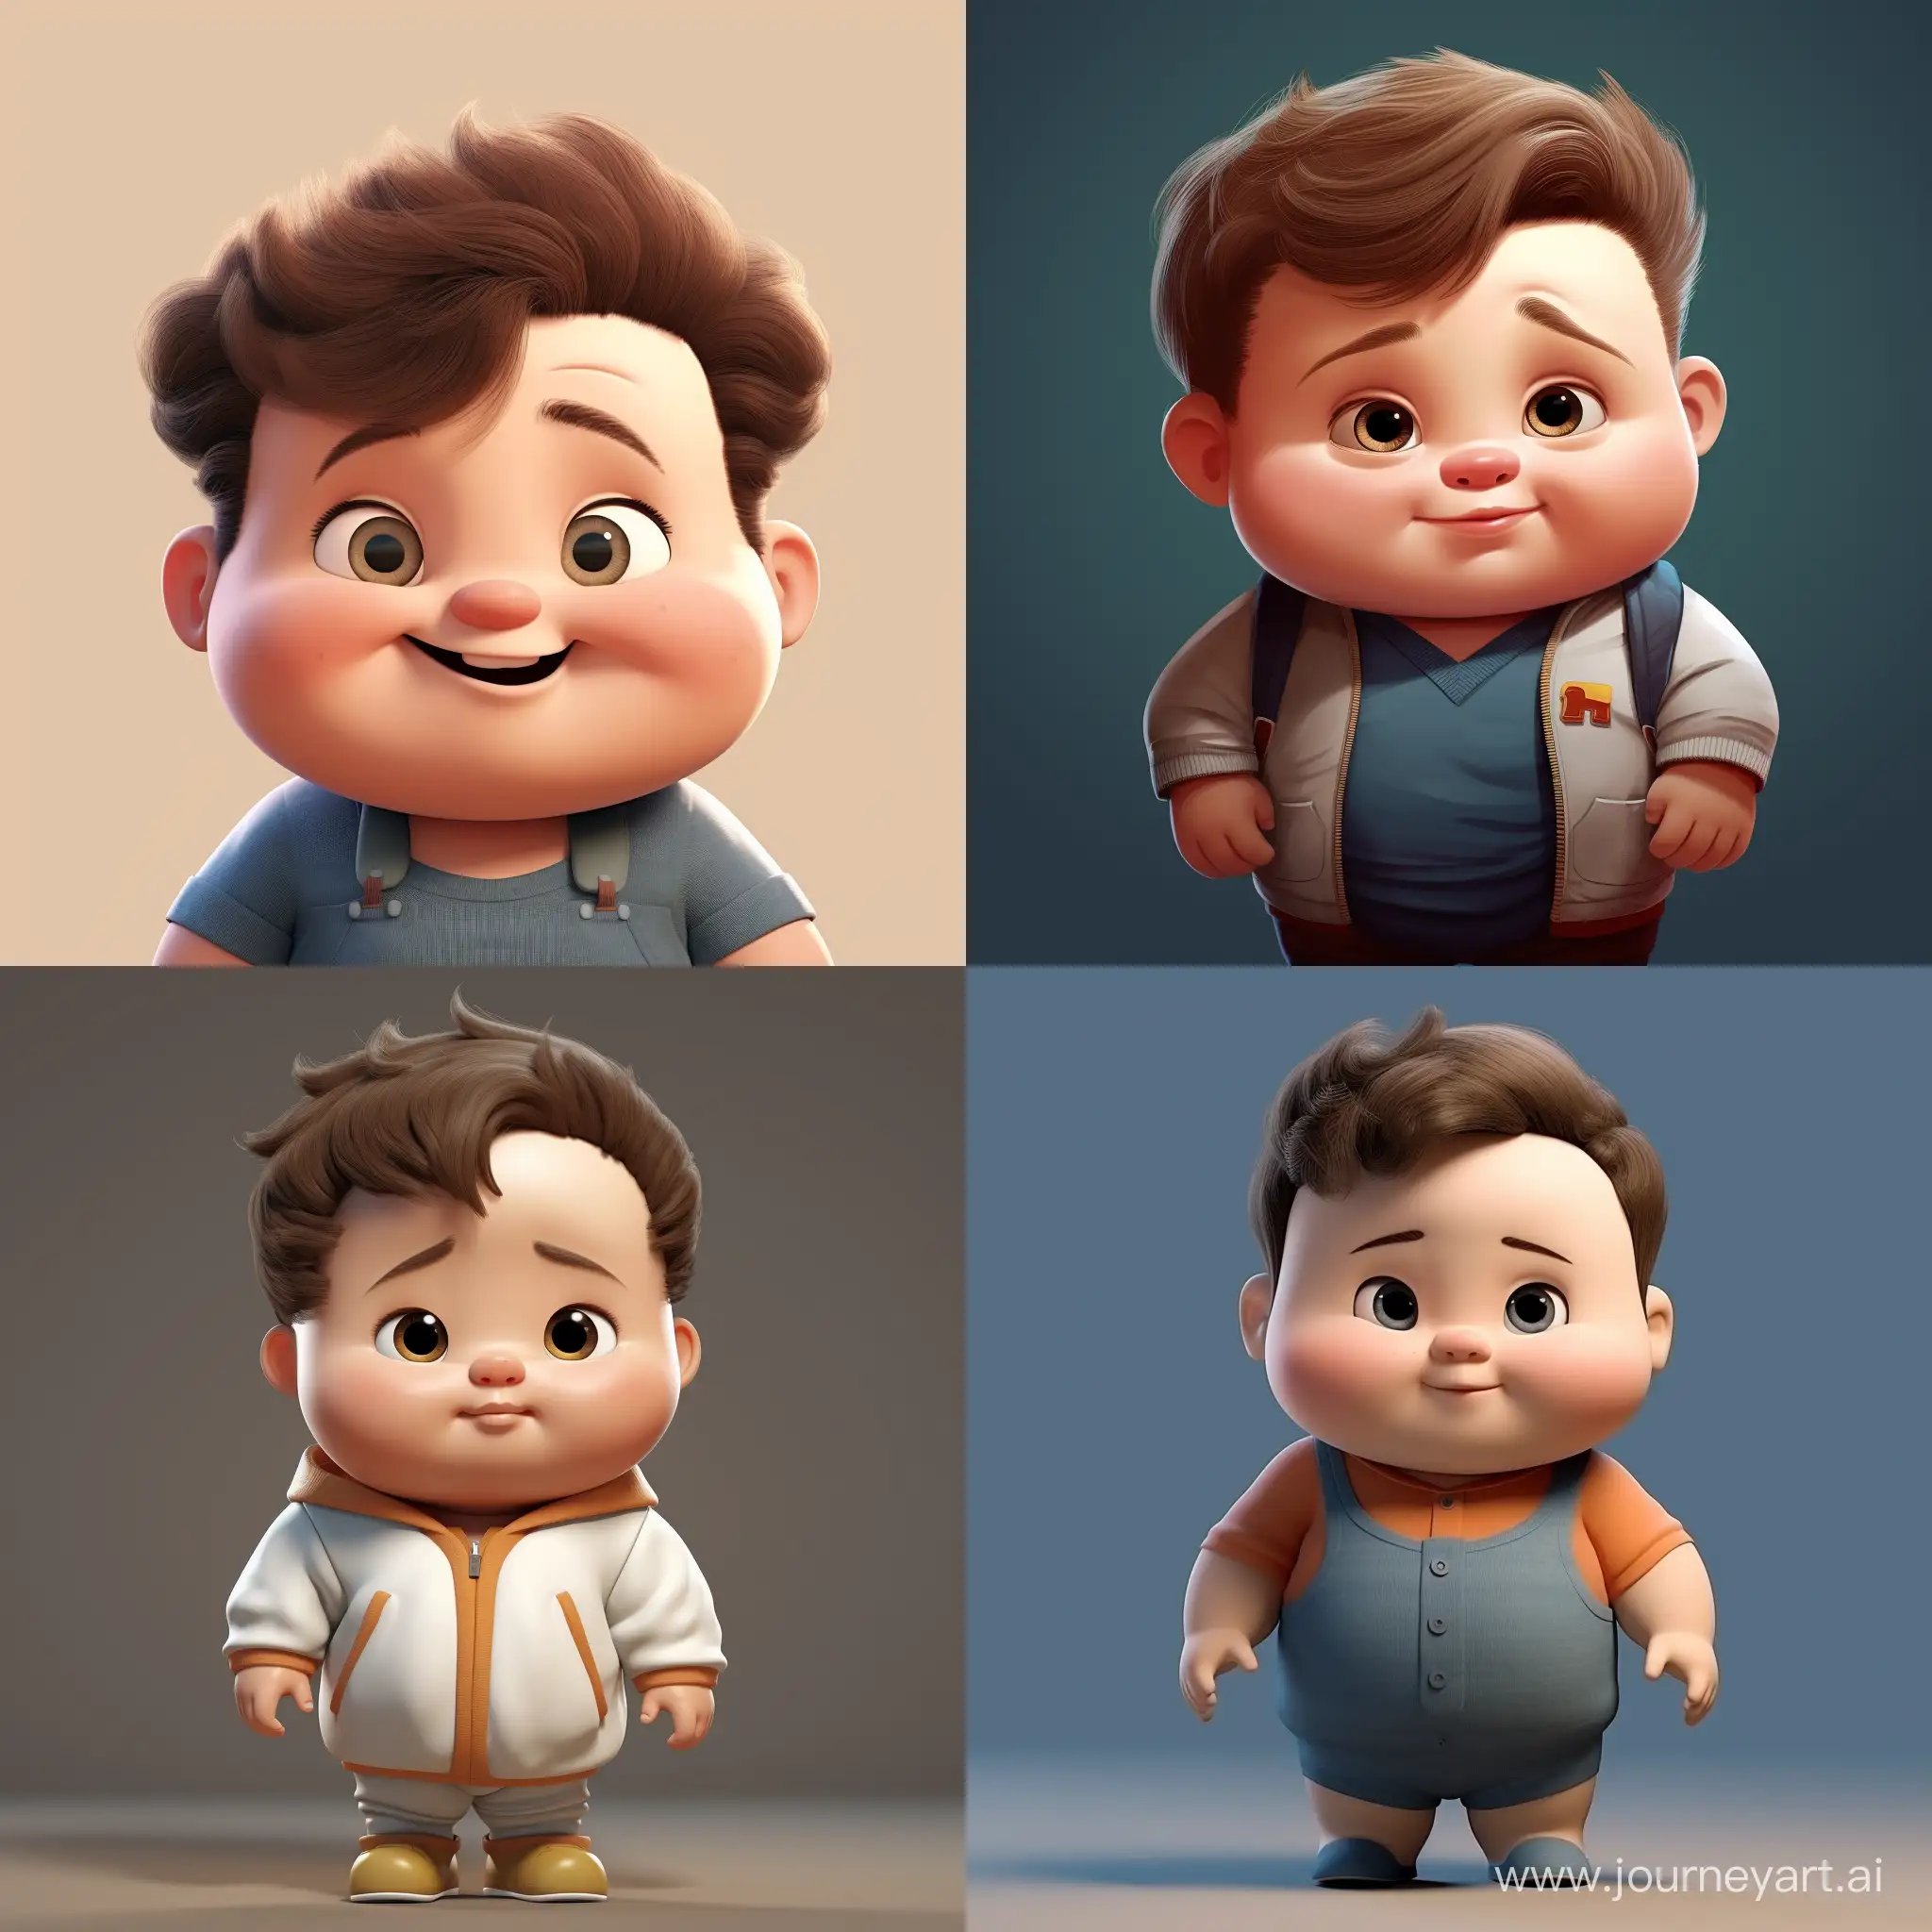 Playful-Cartoon-Child-Designer-with-Cute-Features